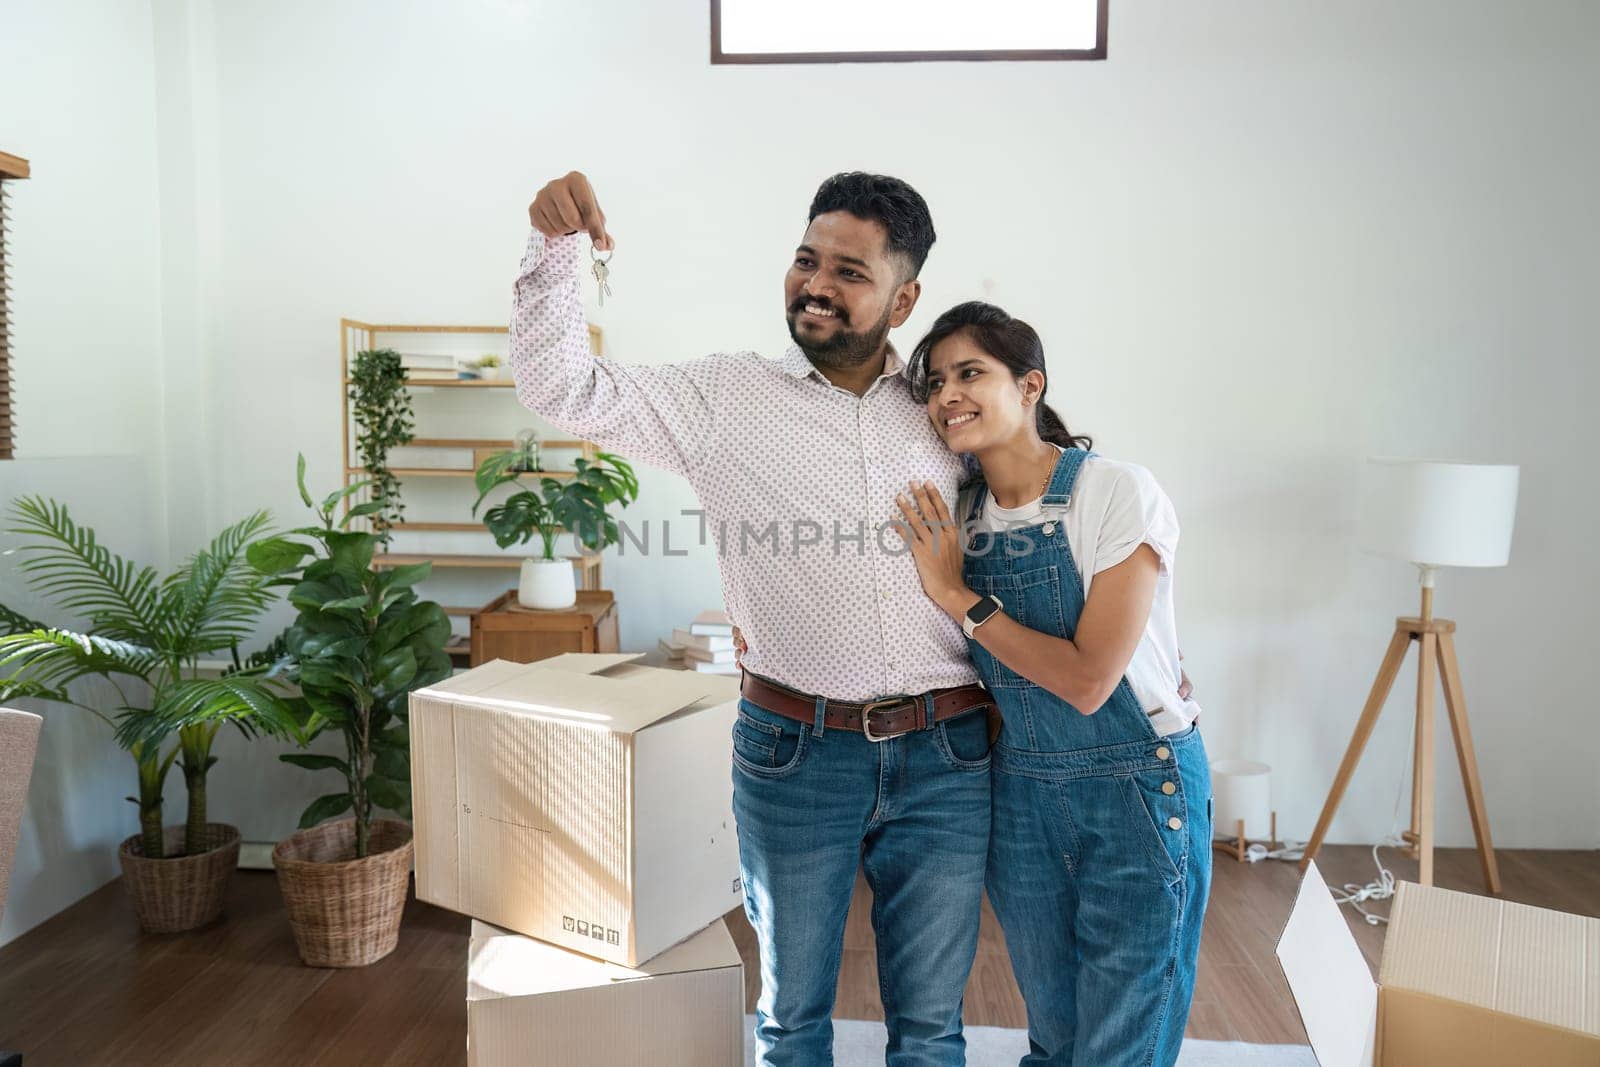 Indian couple moving into a new home, holding keys, surrounded by cardboard boxes and houseplants, celebrating new beginnings in a modern living room.